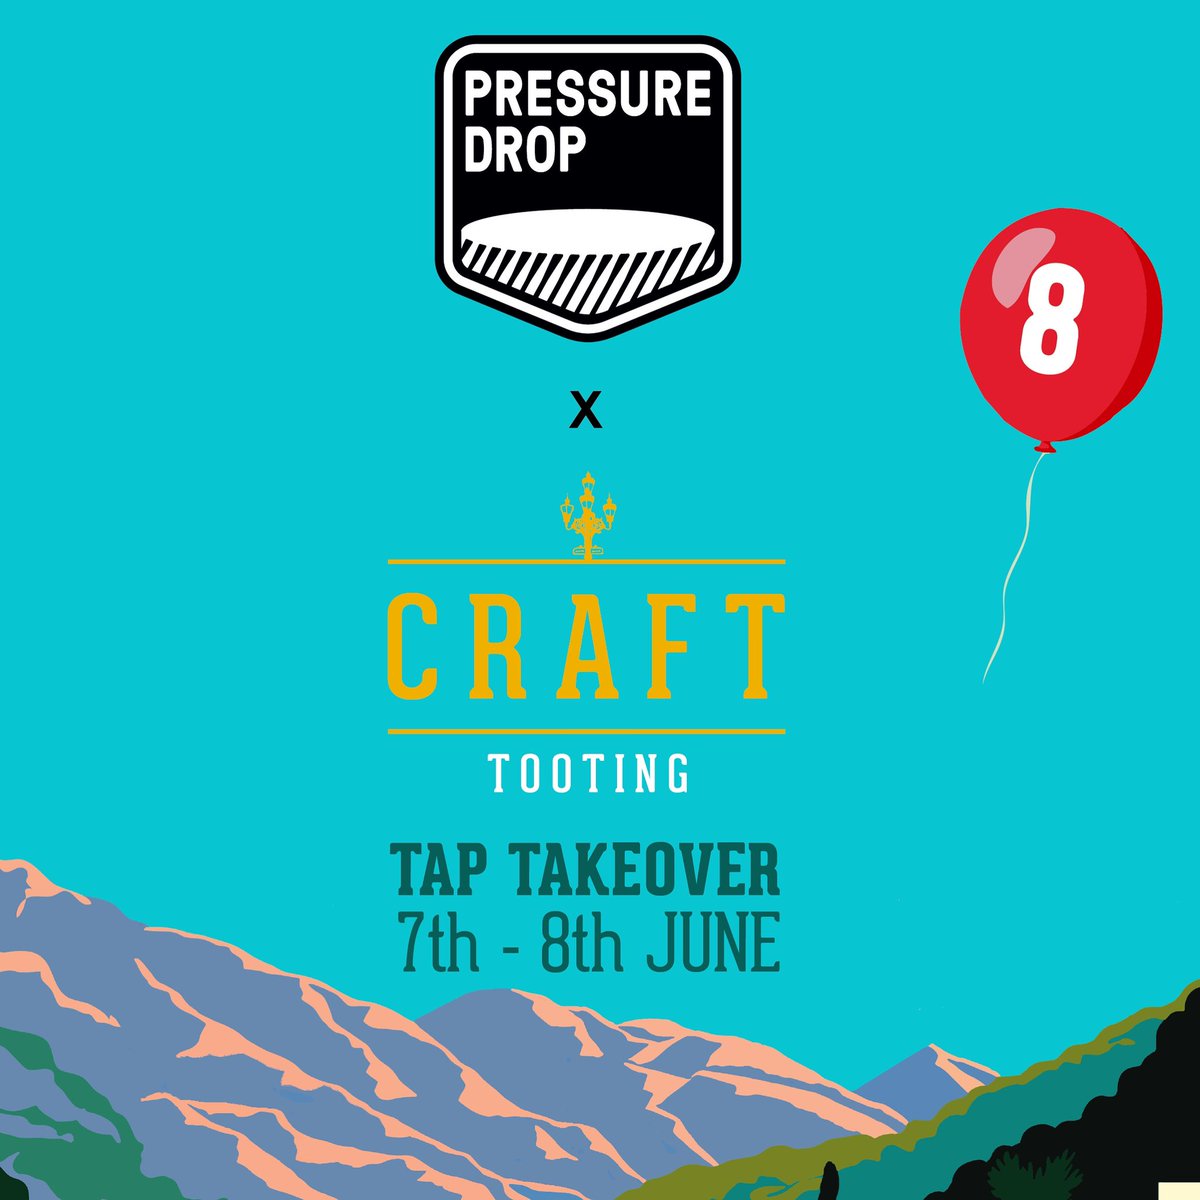 Been busy building and saving a MASSIVE order for our 8th BIRTHDAY PARTY! 🎉🥳🍾 We’re celebrating by having a #PressureDrop Tap Take Over 7th & 8th June (and possible Sun 9th if some kegs are left!) Save the date & come on down! 🎂🎈#CraftTooting #Craftbeer #TapTakeOver #SW17